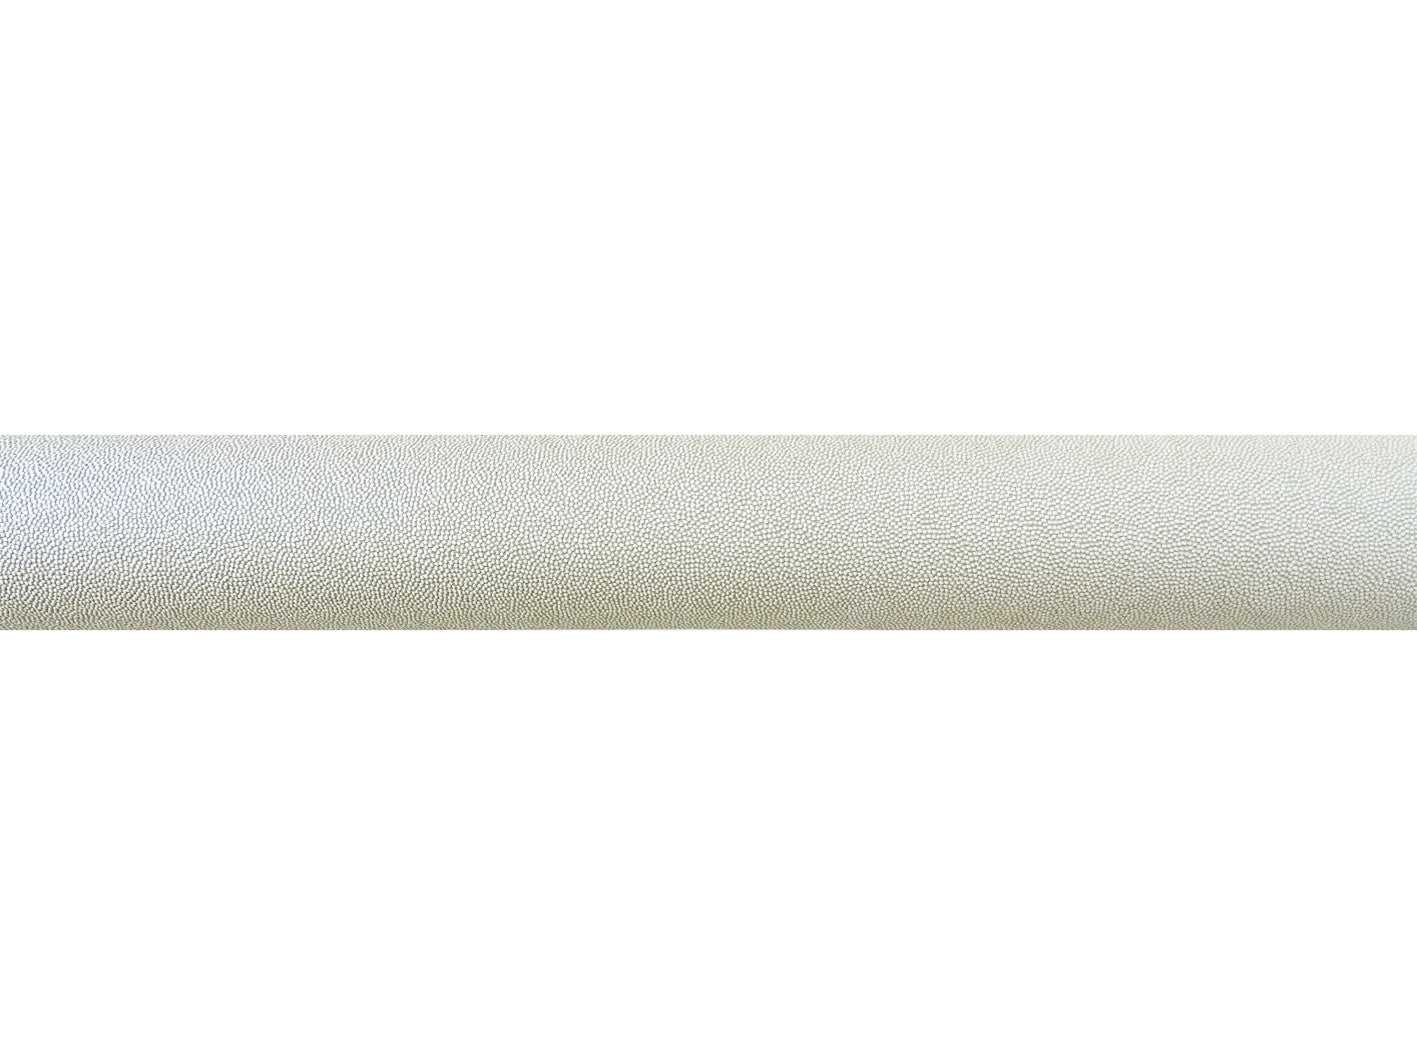 white pepper flush ceiling fix curtain pole by Walcot House